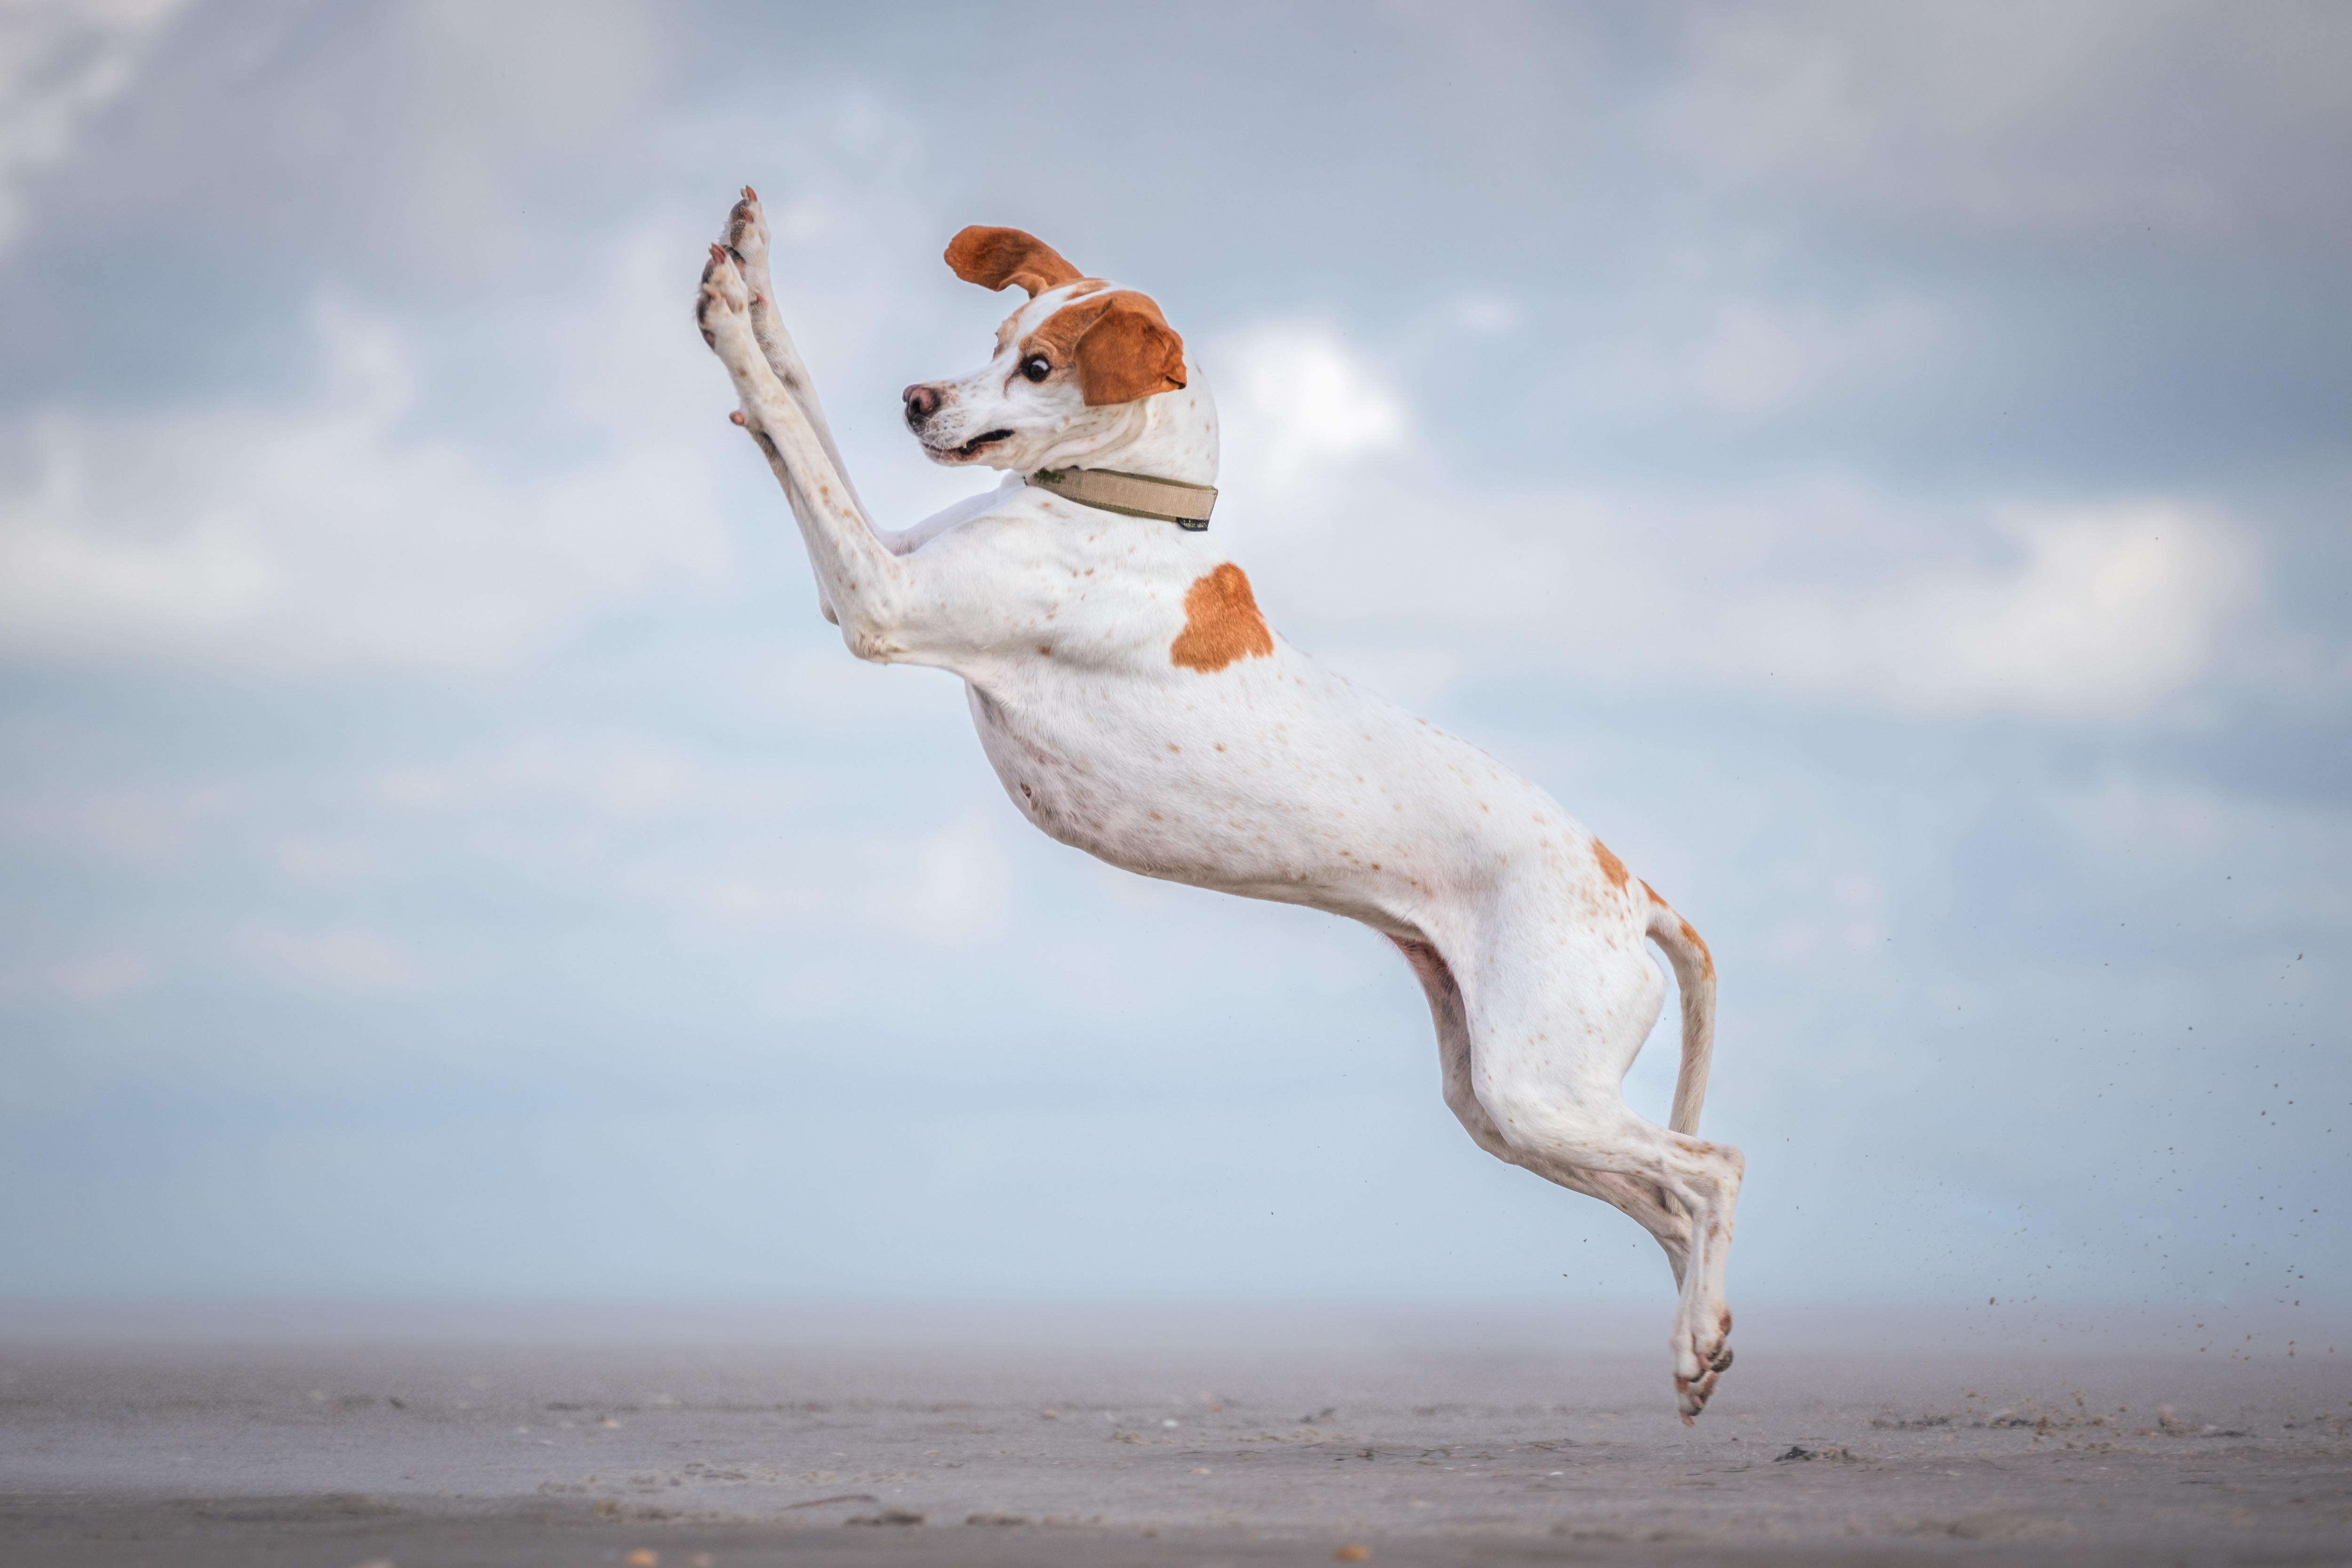 A white and brown dog jumping in the air with his front paws up